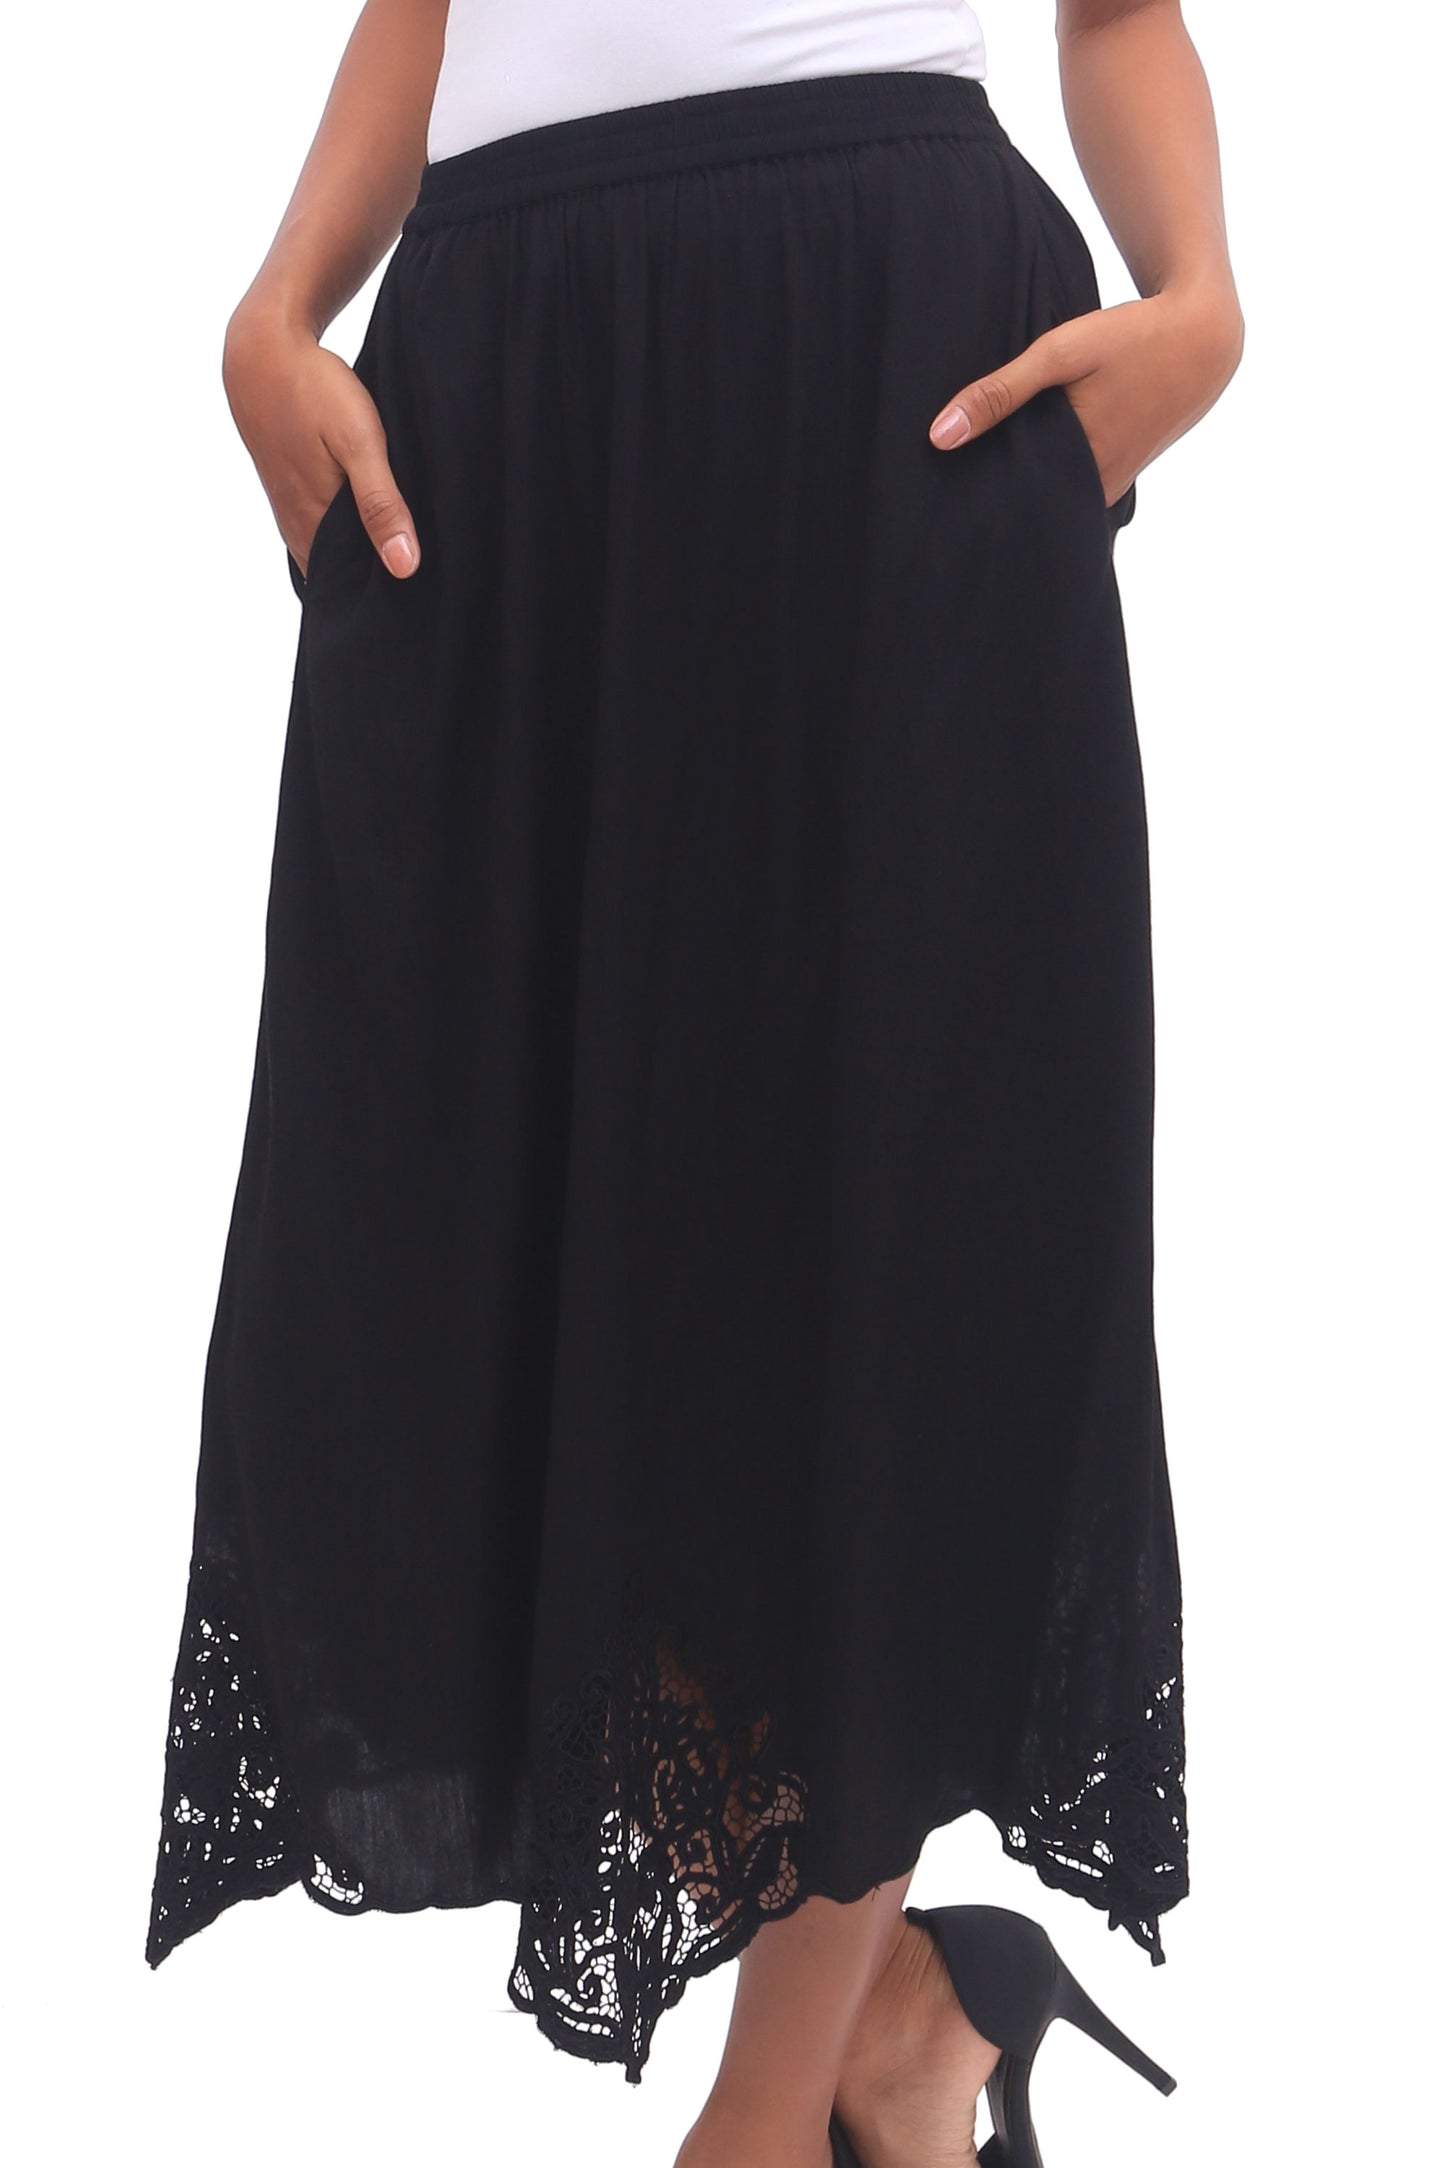 Juwita Style Hand-Embroidered Rayon Midi Skirt in Onyx from Bali